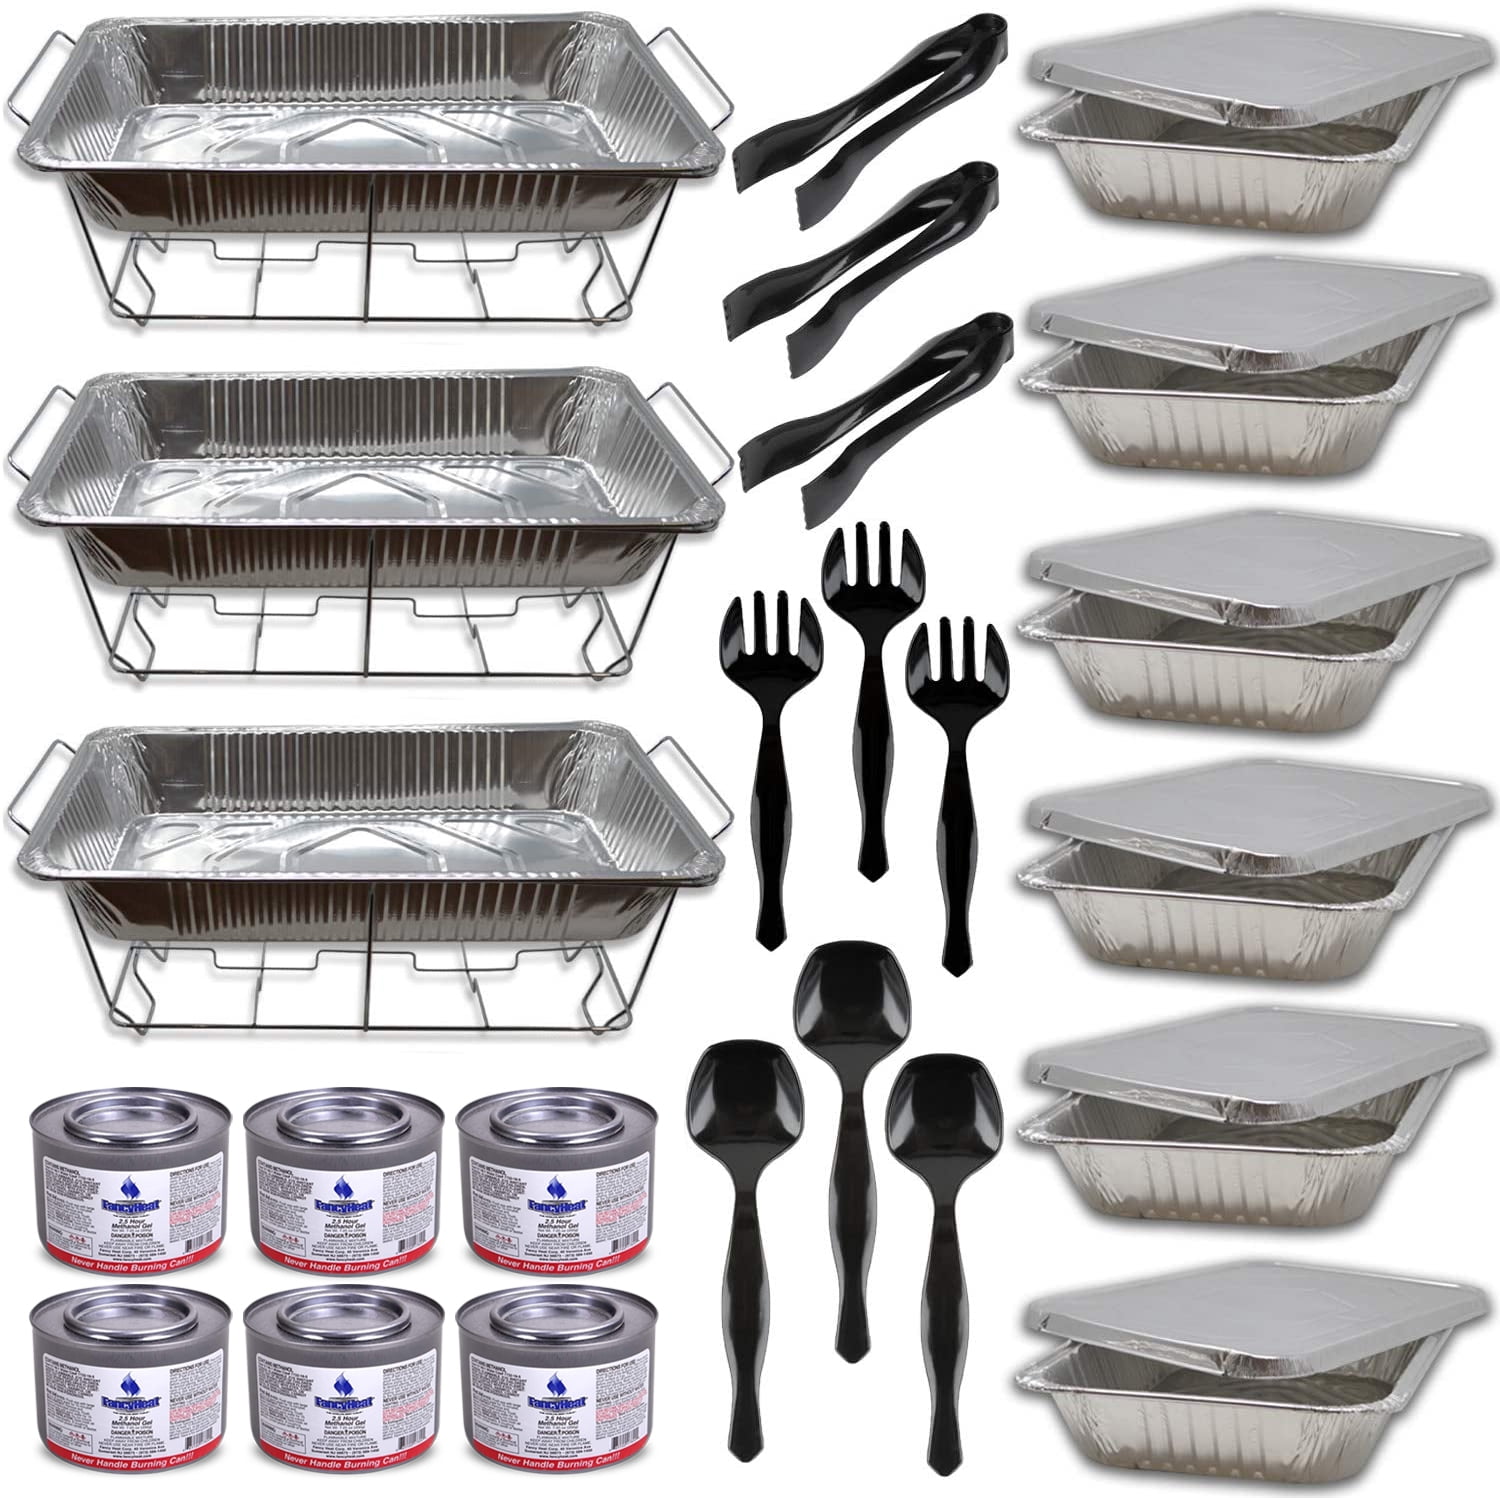 Full Size Disposable Foil Pan Holder, Aluminum Pan Buffet Server, Tray  Holder Display, Catering, Weddings, Farmhouse Kitchen Decor, Parties 